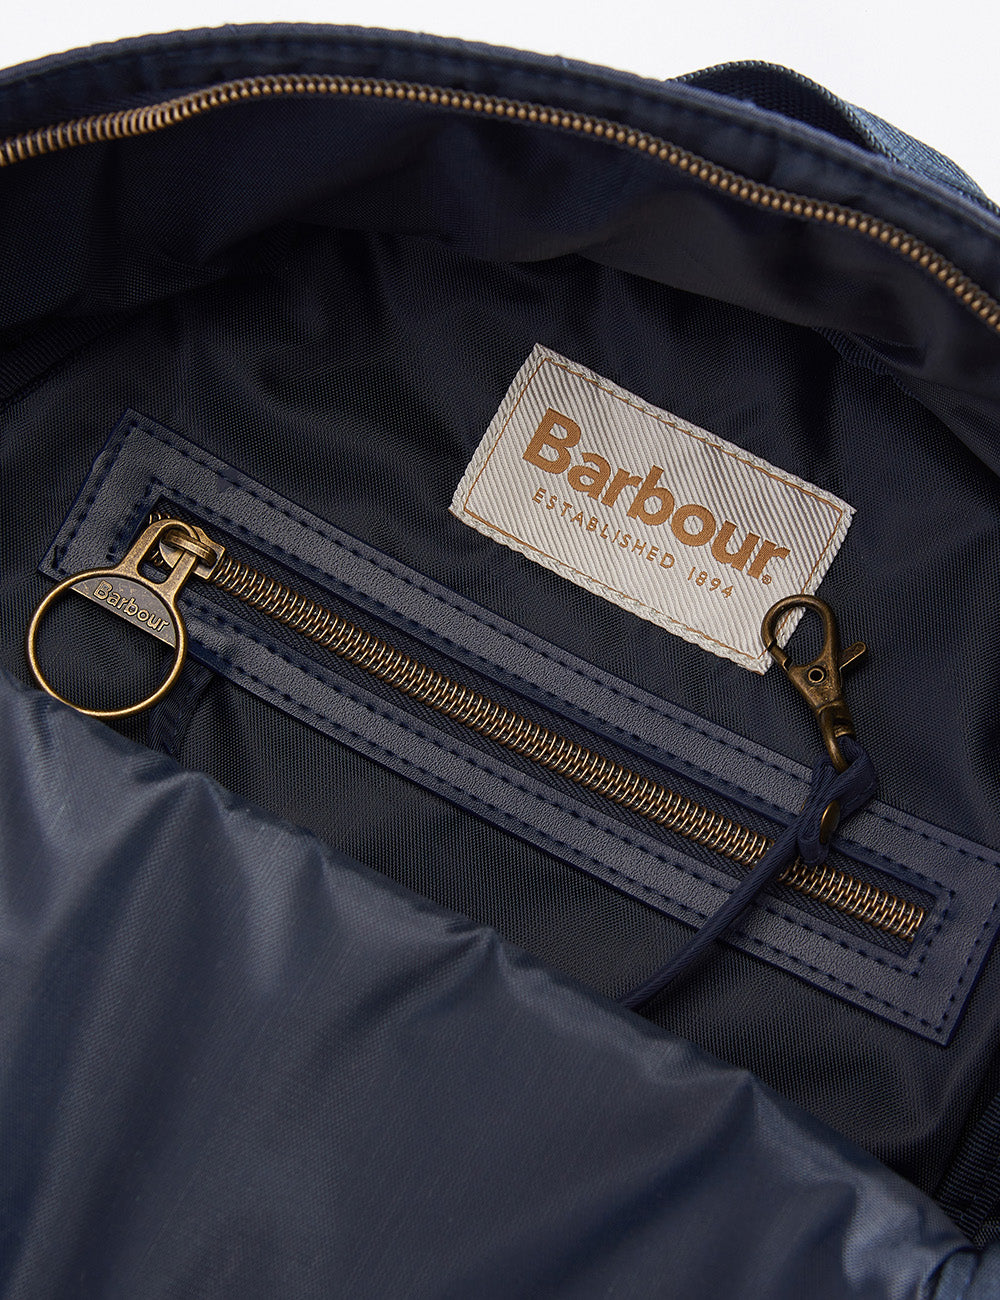 Barbour Quilted Backpack - Navy